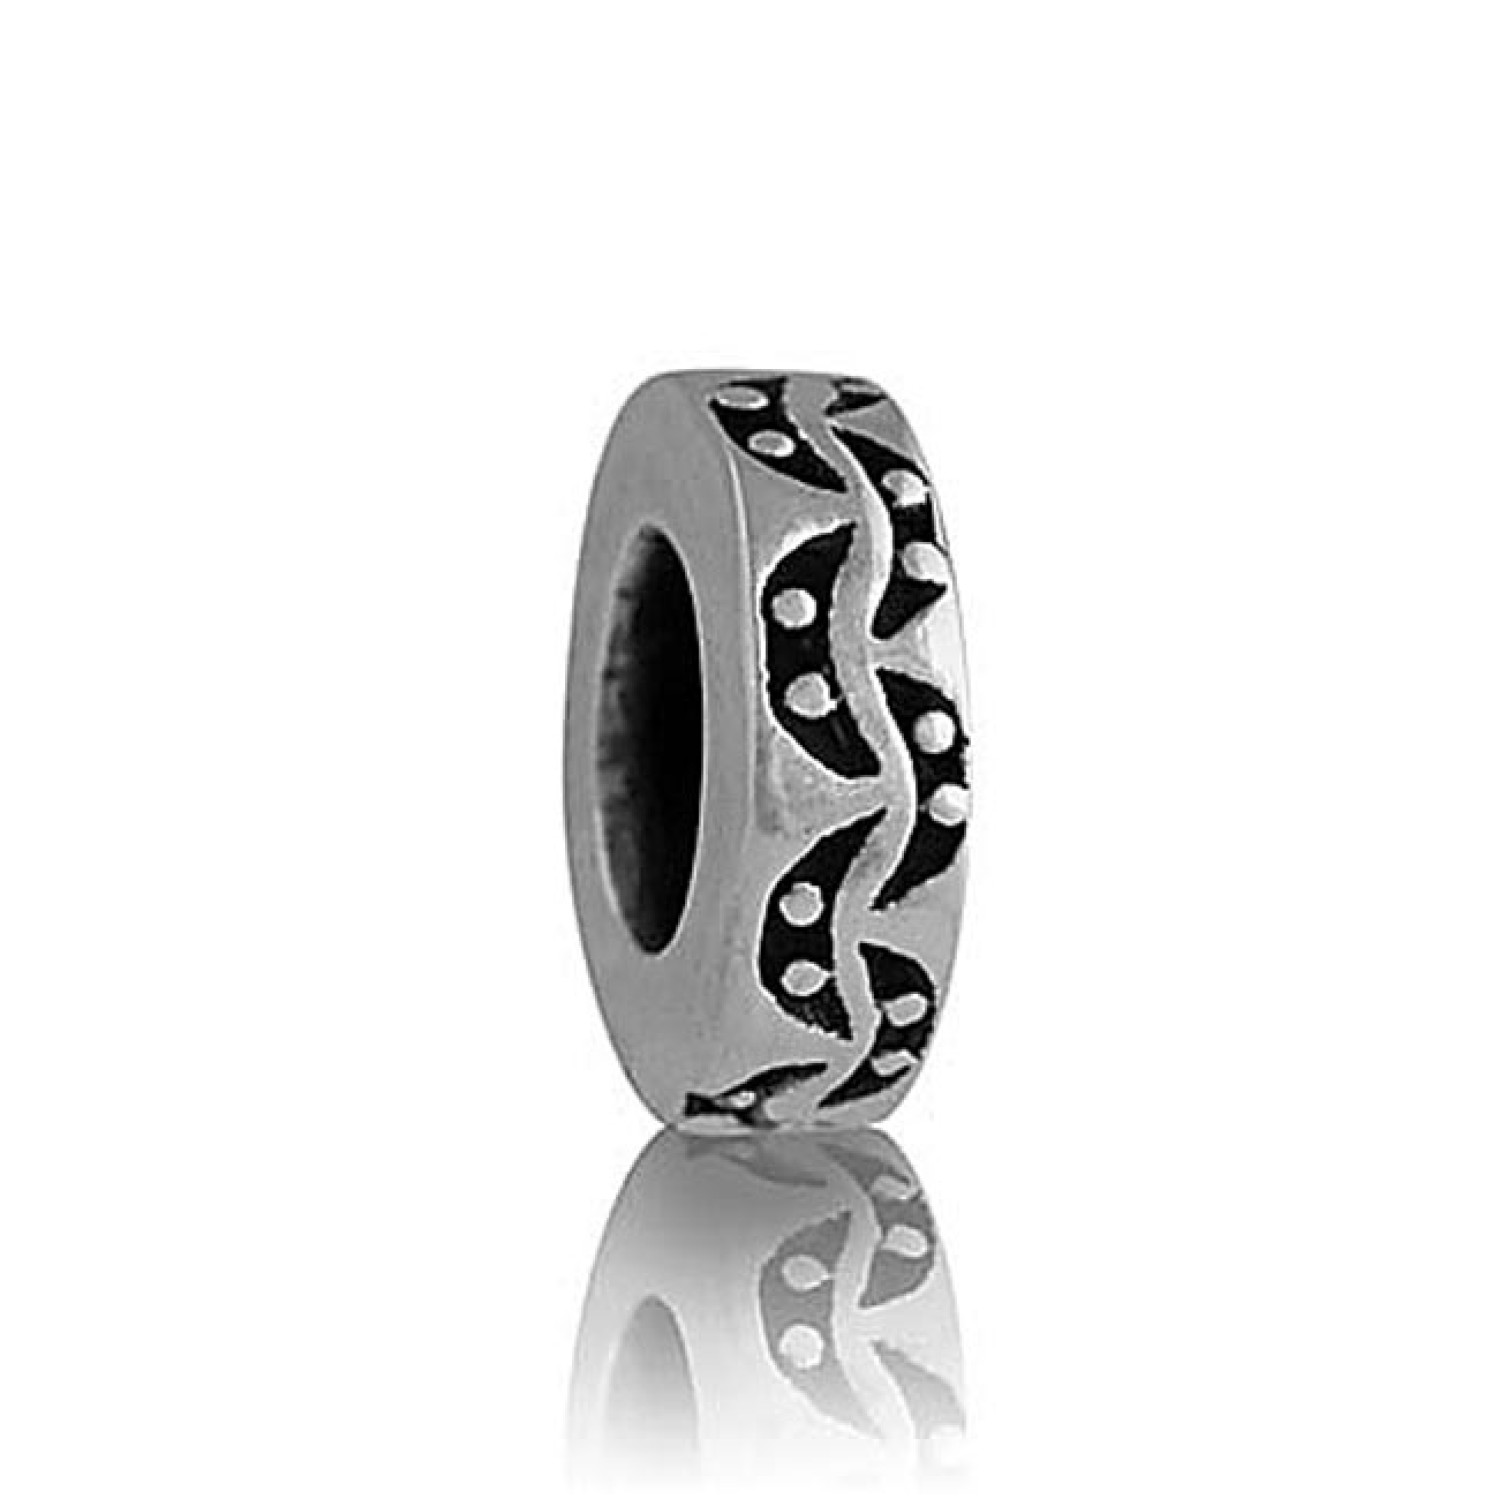 LKS001 Evolve Pacific Spacer. By wearing Evolve New Zealand jewellery you celebrate Aotearoa and the most important events in your life in a very visual way, safeguarding your ever evolving memories for a lifetime Sterling Silver Christies exclusiv @chris